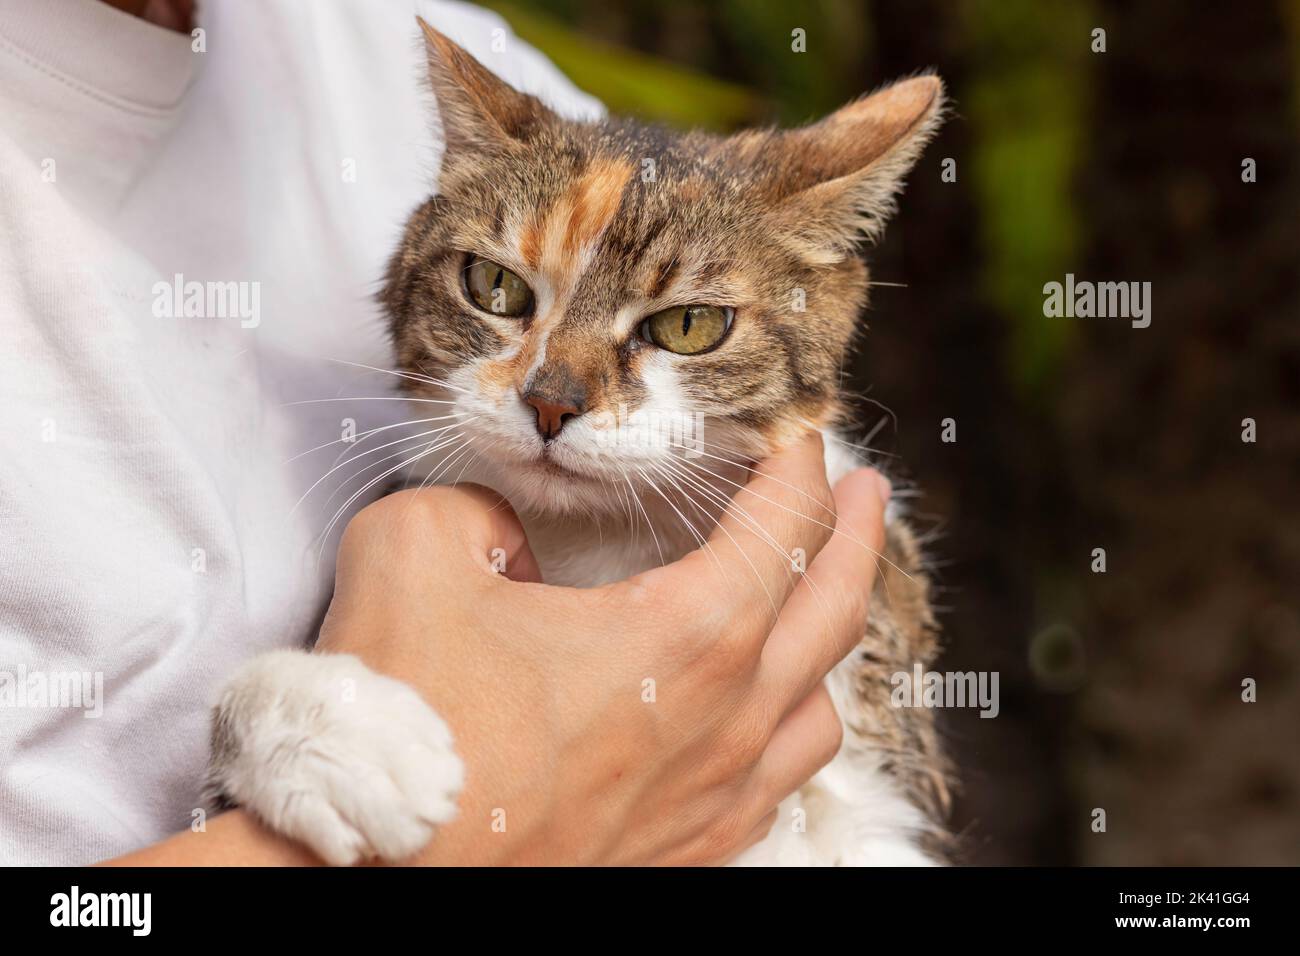 Unrecognizable young man stroking domestic cat with green eyes looking to camera when on human arms Stock Photo